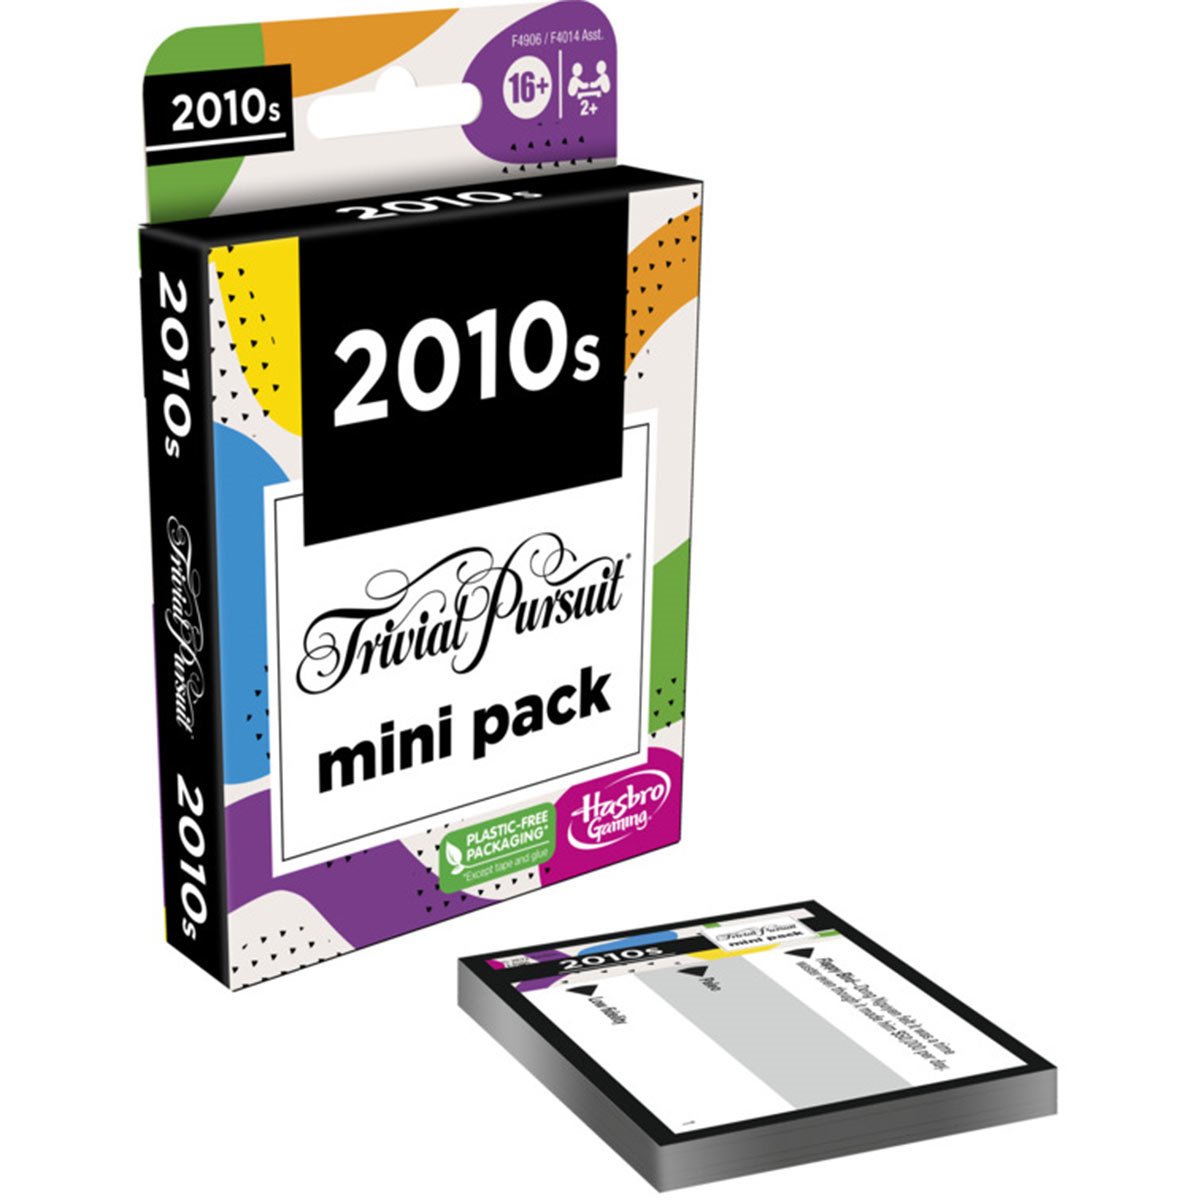 Trivial Pursuit 2010s Mini Pack Game - Entertainment Earth